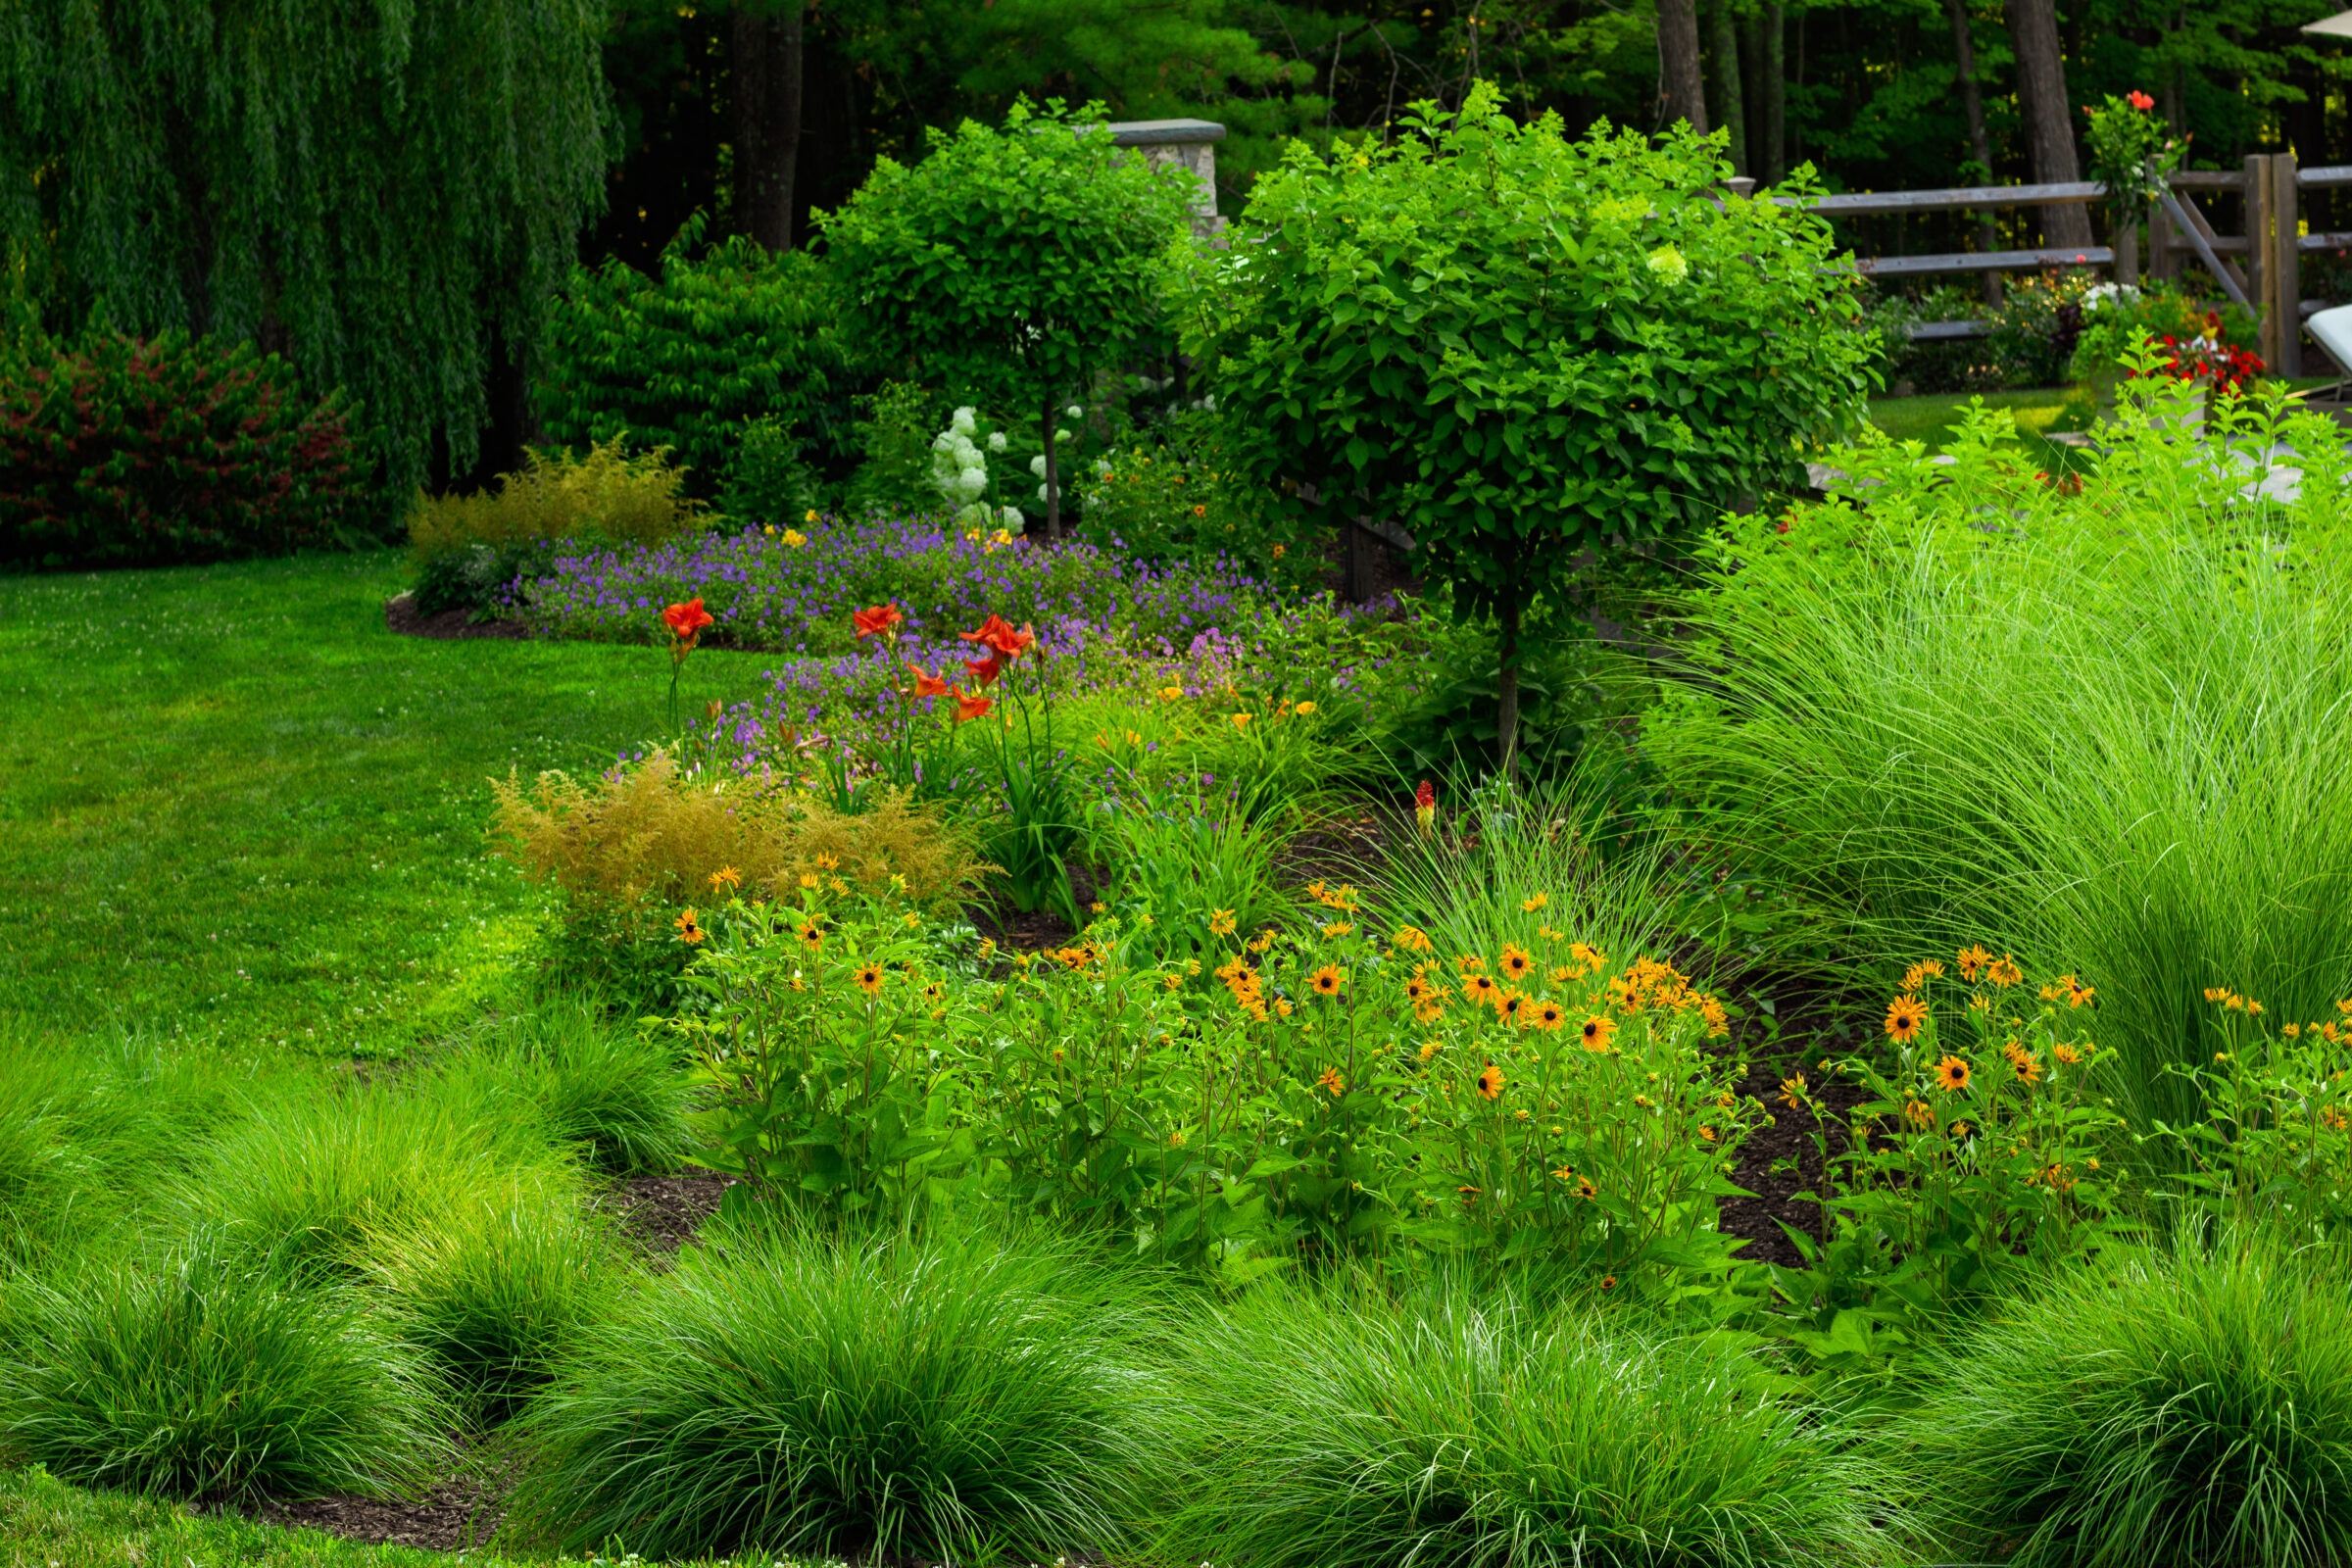 A lush garden with vibrant flowers, ornamental grasses, and green foliage. A wooden fence and weeping willows are visible in the background.